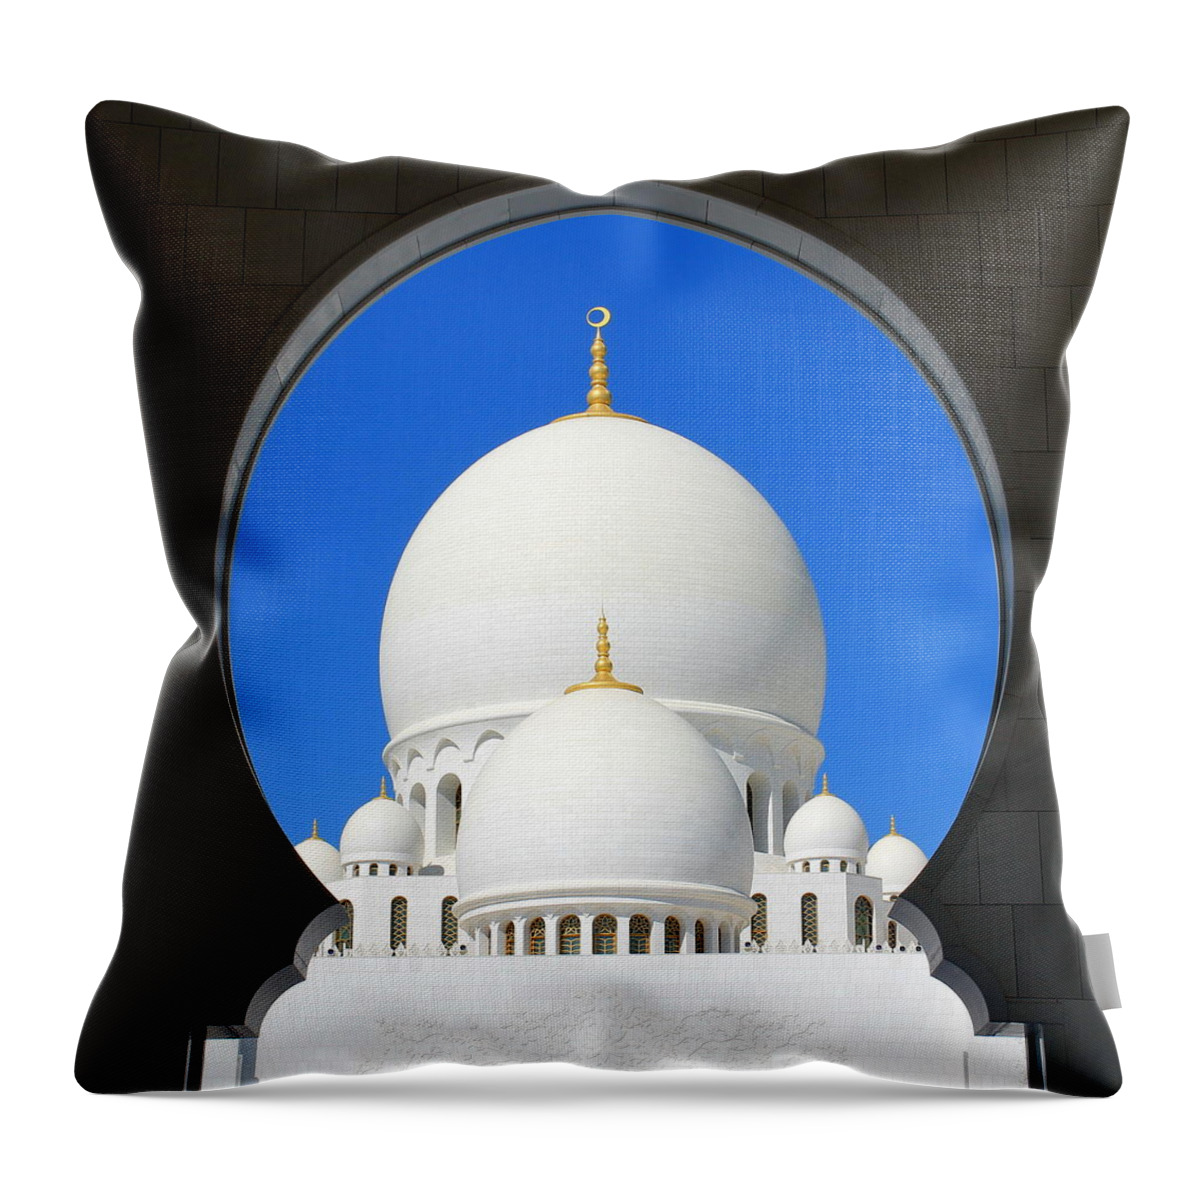 Tranquility Throw Pillow featuring the photograph Entrance To Grand Mosque by Fintrvlr